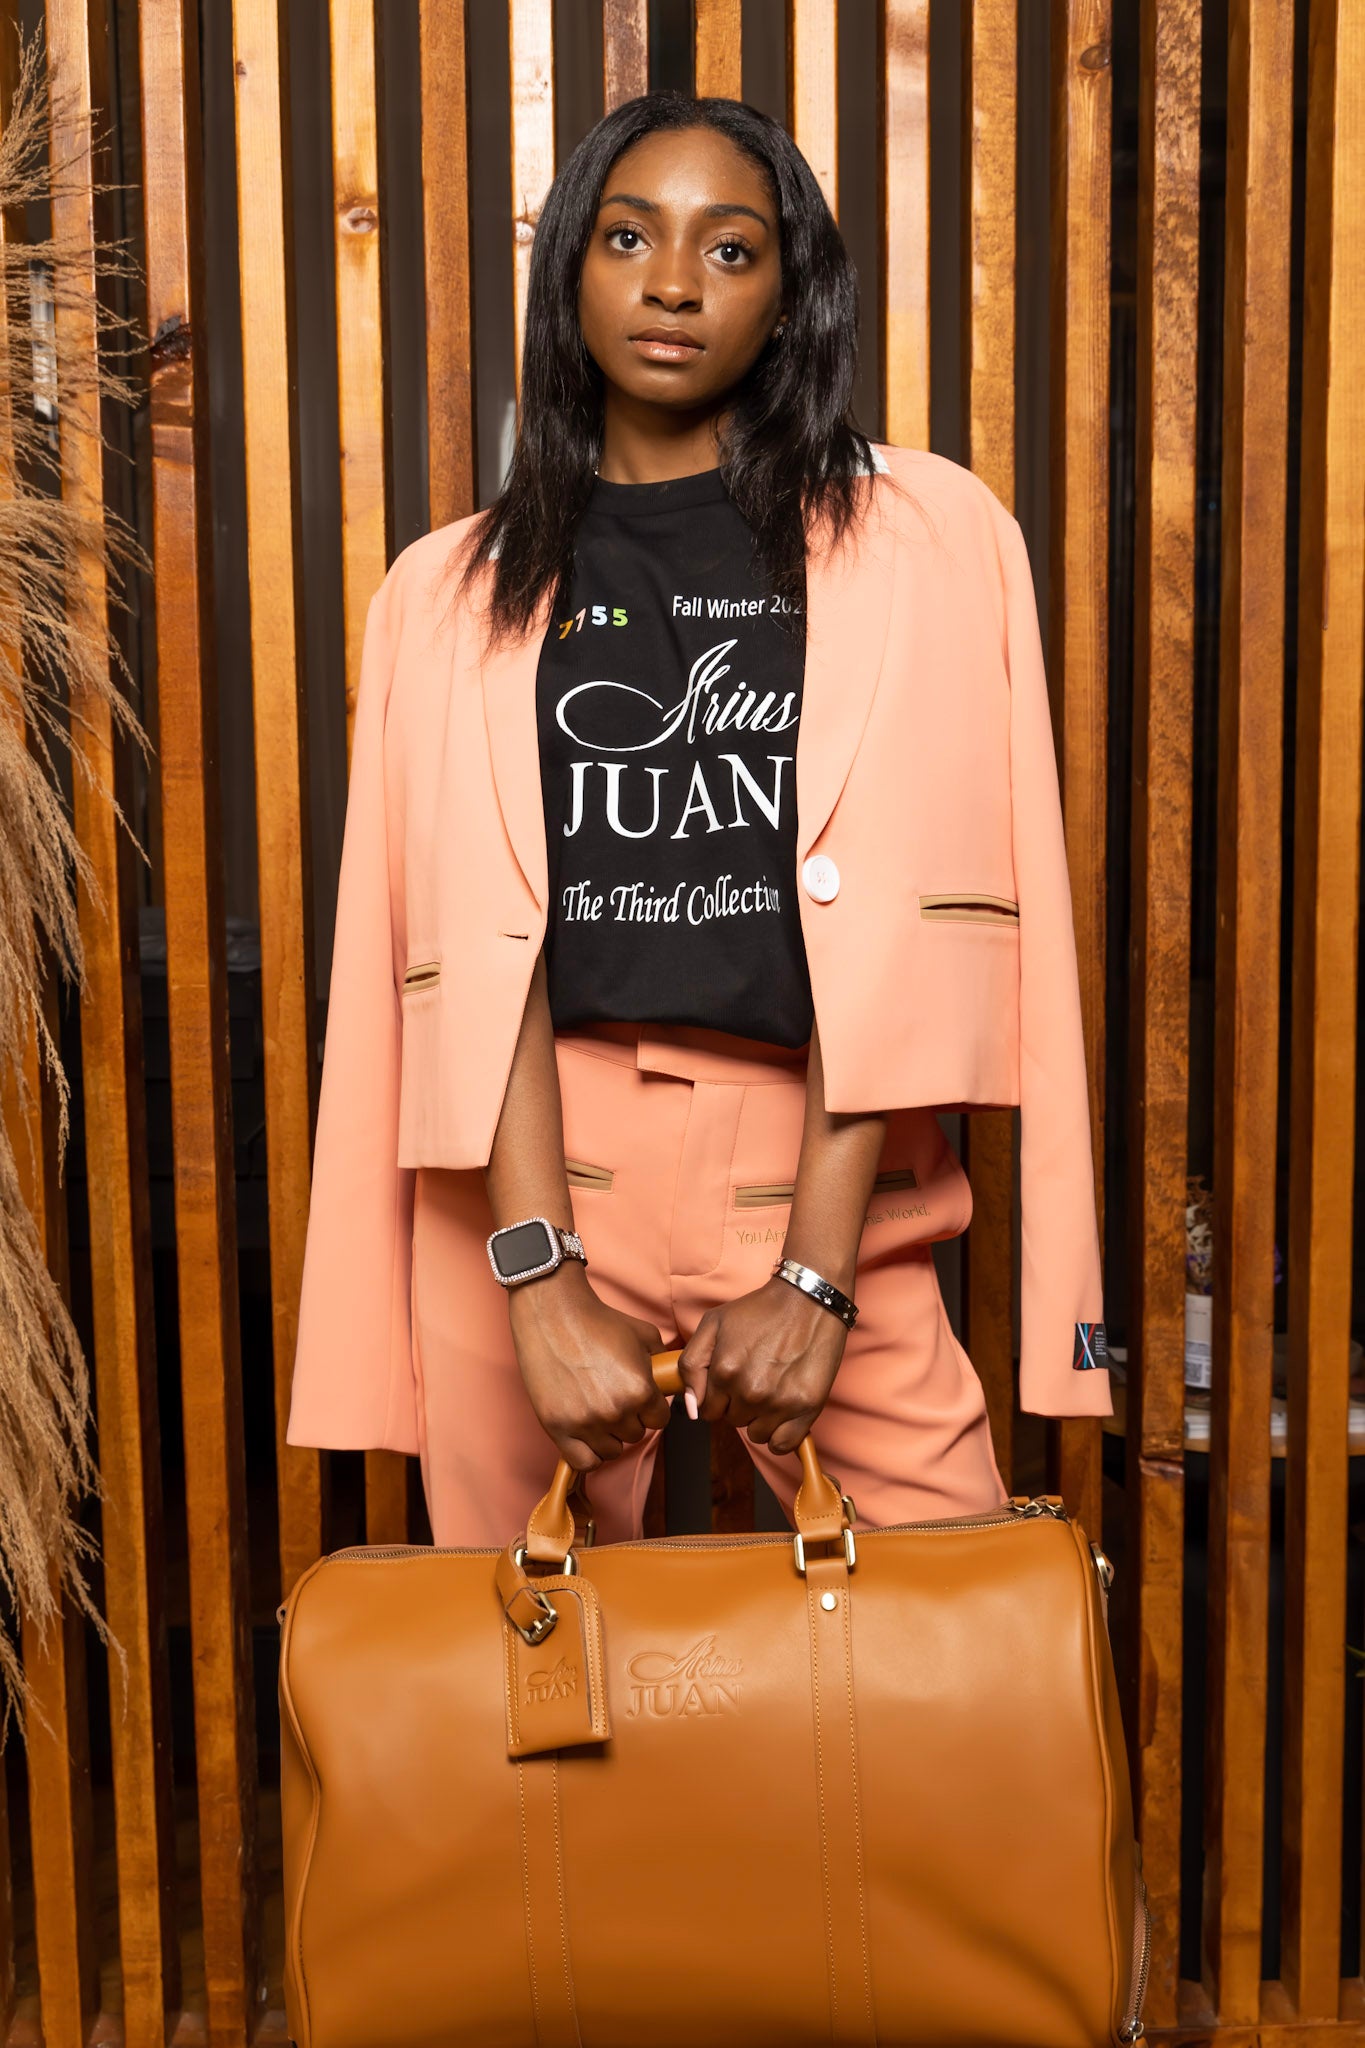 Model wearing Nature's Gift Cropped Blazer: Salmon Pink, Nature's Gift Salmon Pink Pants, The Classic Duffle Bag, The Third Collection T-Shirt: Black in a Arius Juan Campaign.